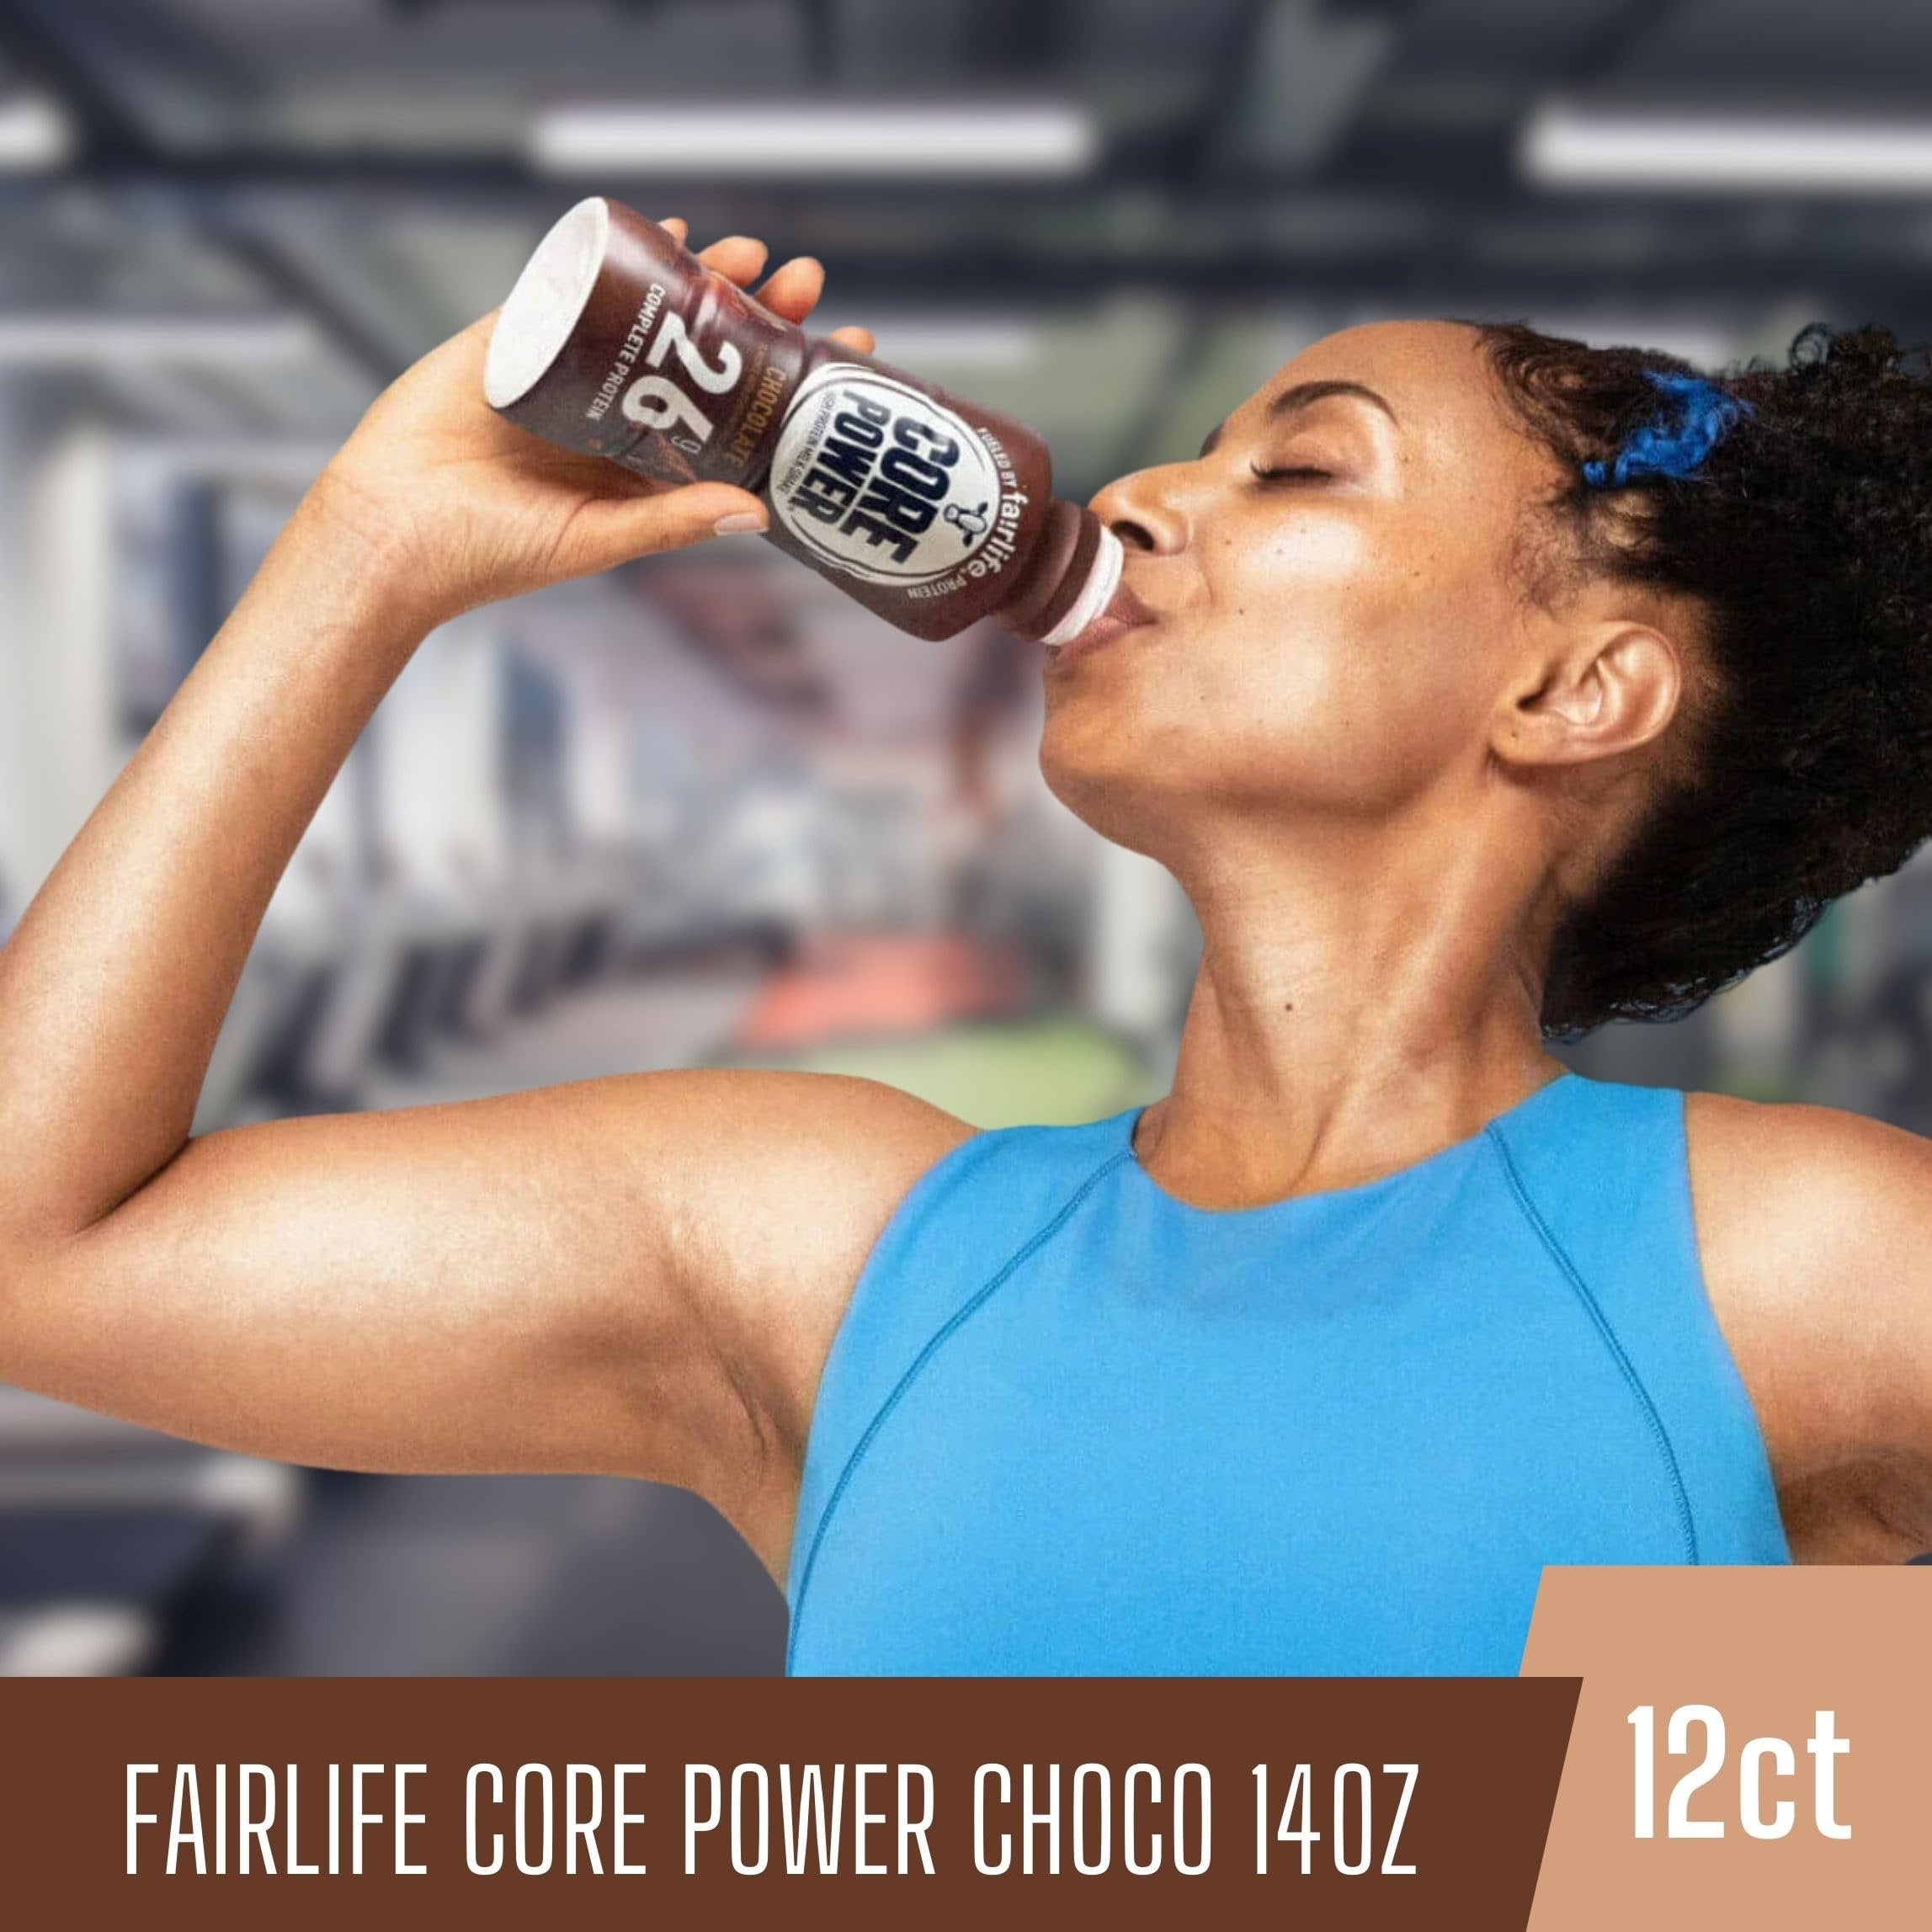 Core Power Fairlife 26g Protein Milk Shakes - Ready To Drink for Workout Recovery - Chocolate Flavor, 14 Fl Oz (Pack of 12) and Multi-Purpose Key Chain